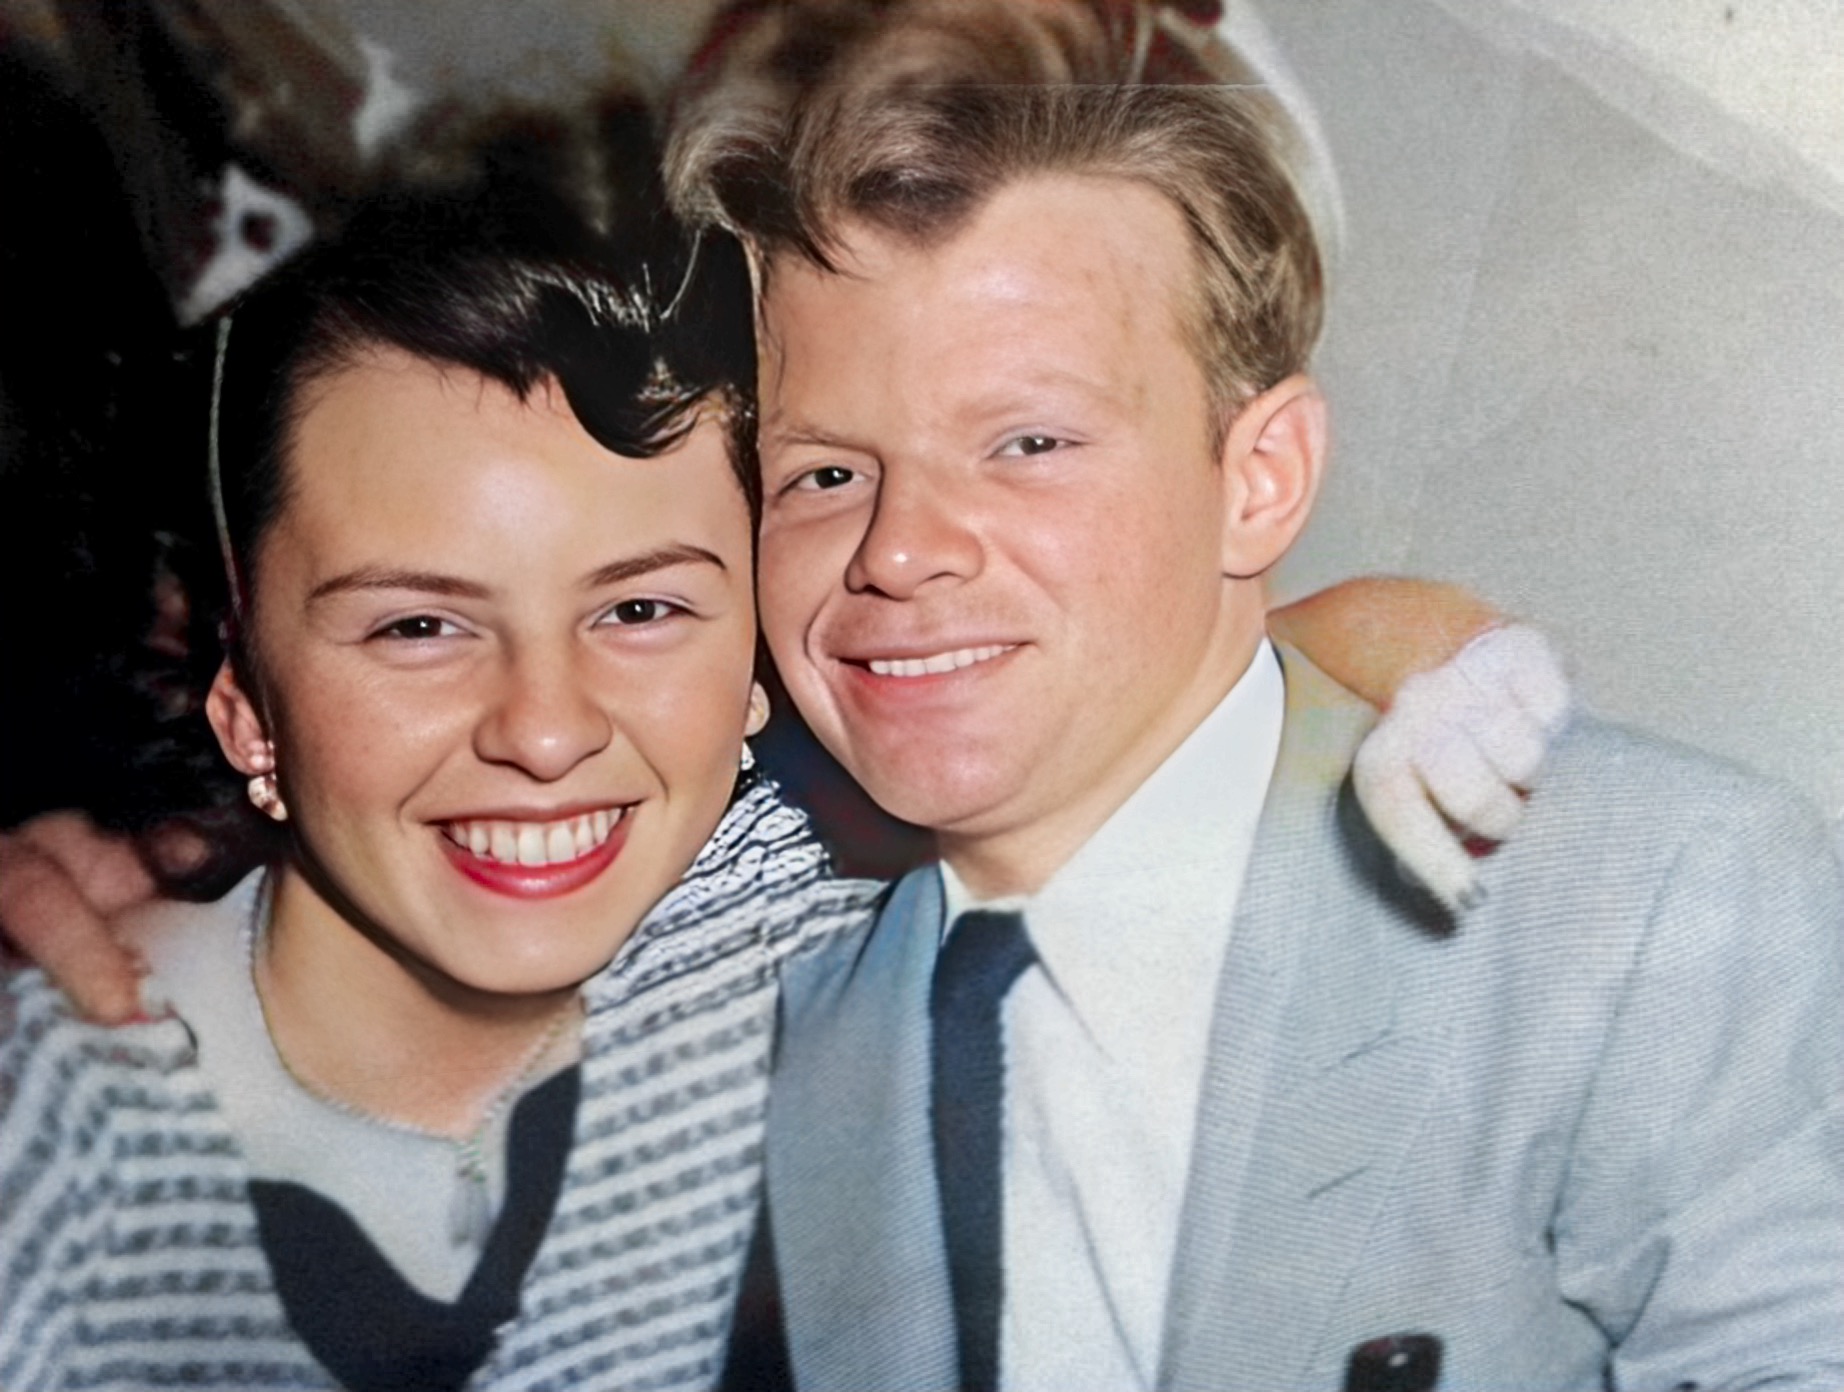 Aunt and uncle from the 1950s